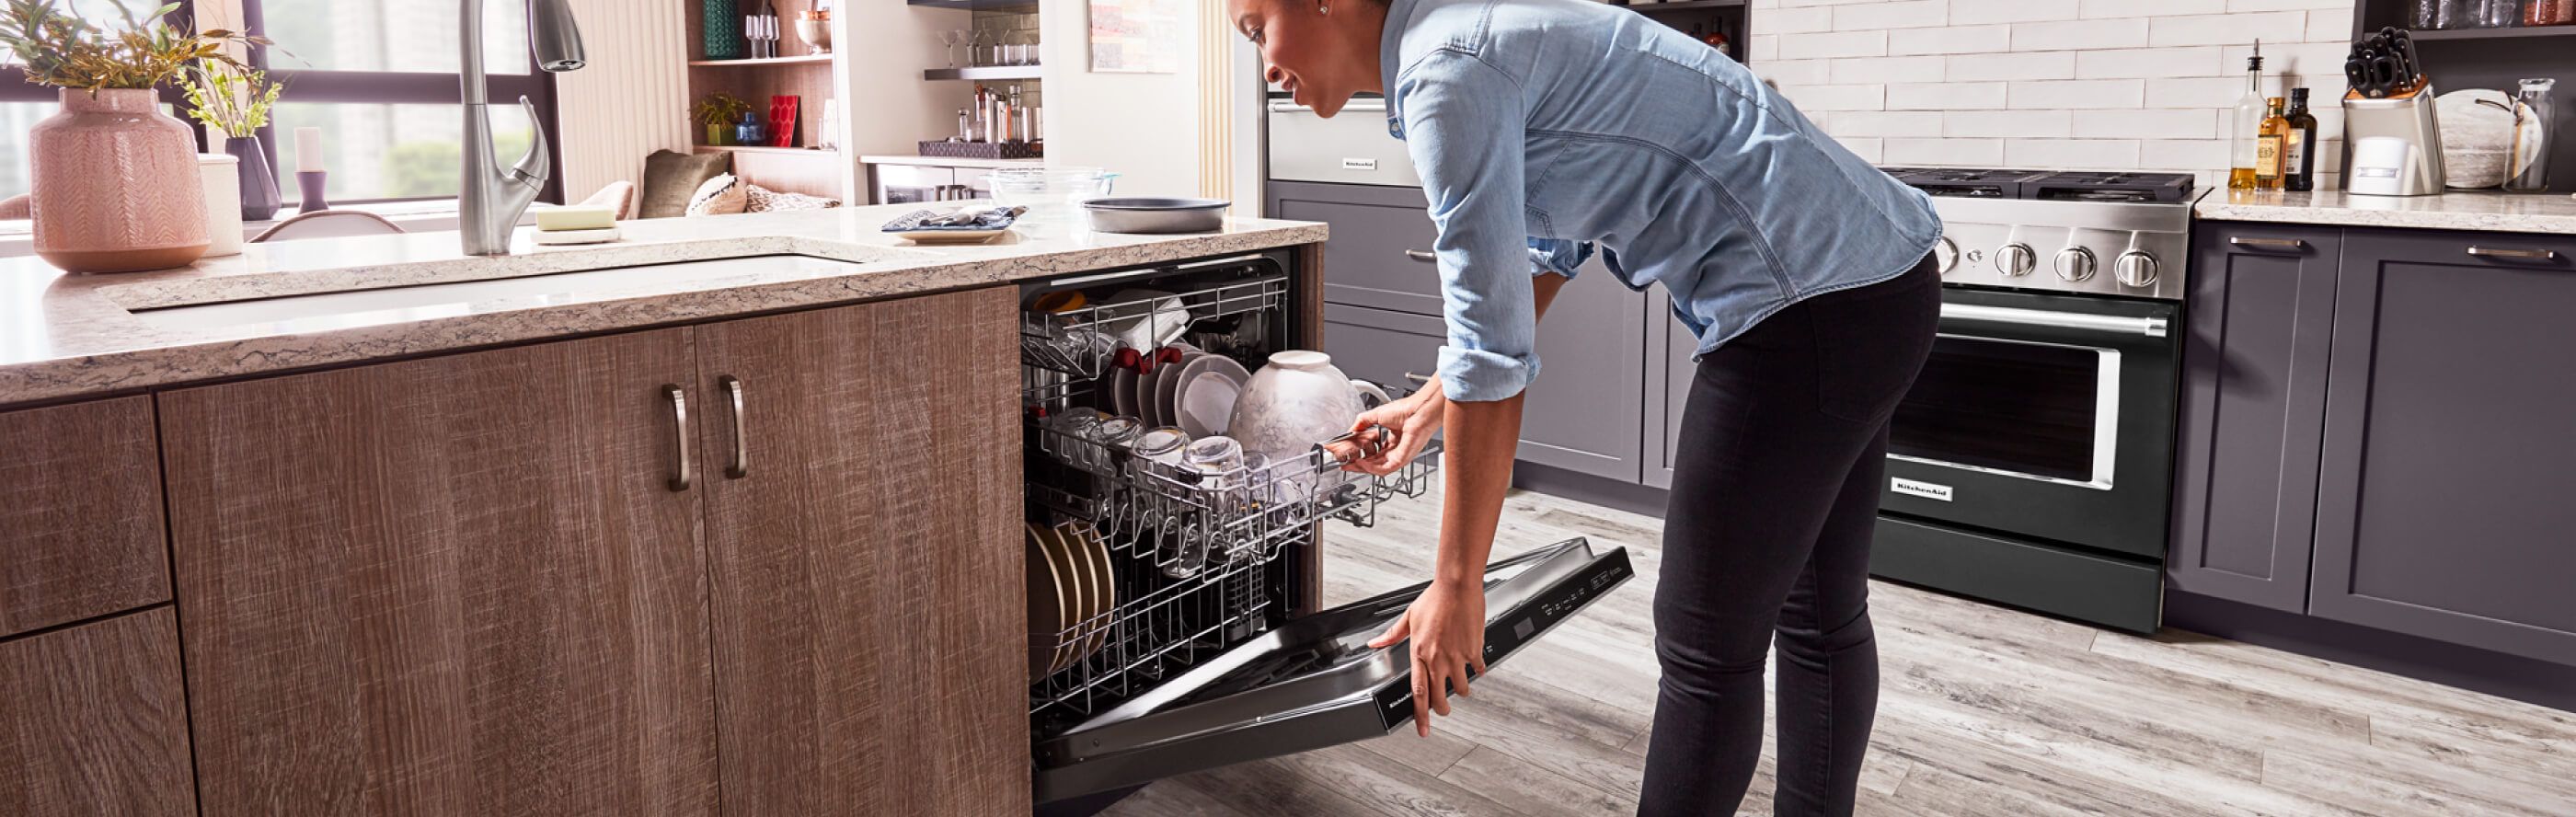 Person closing a loaded dishwasher 